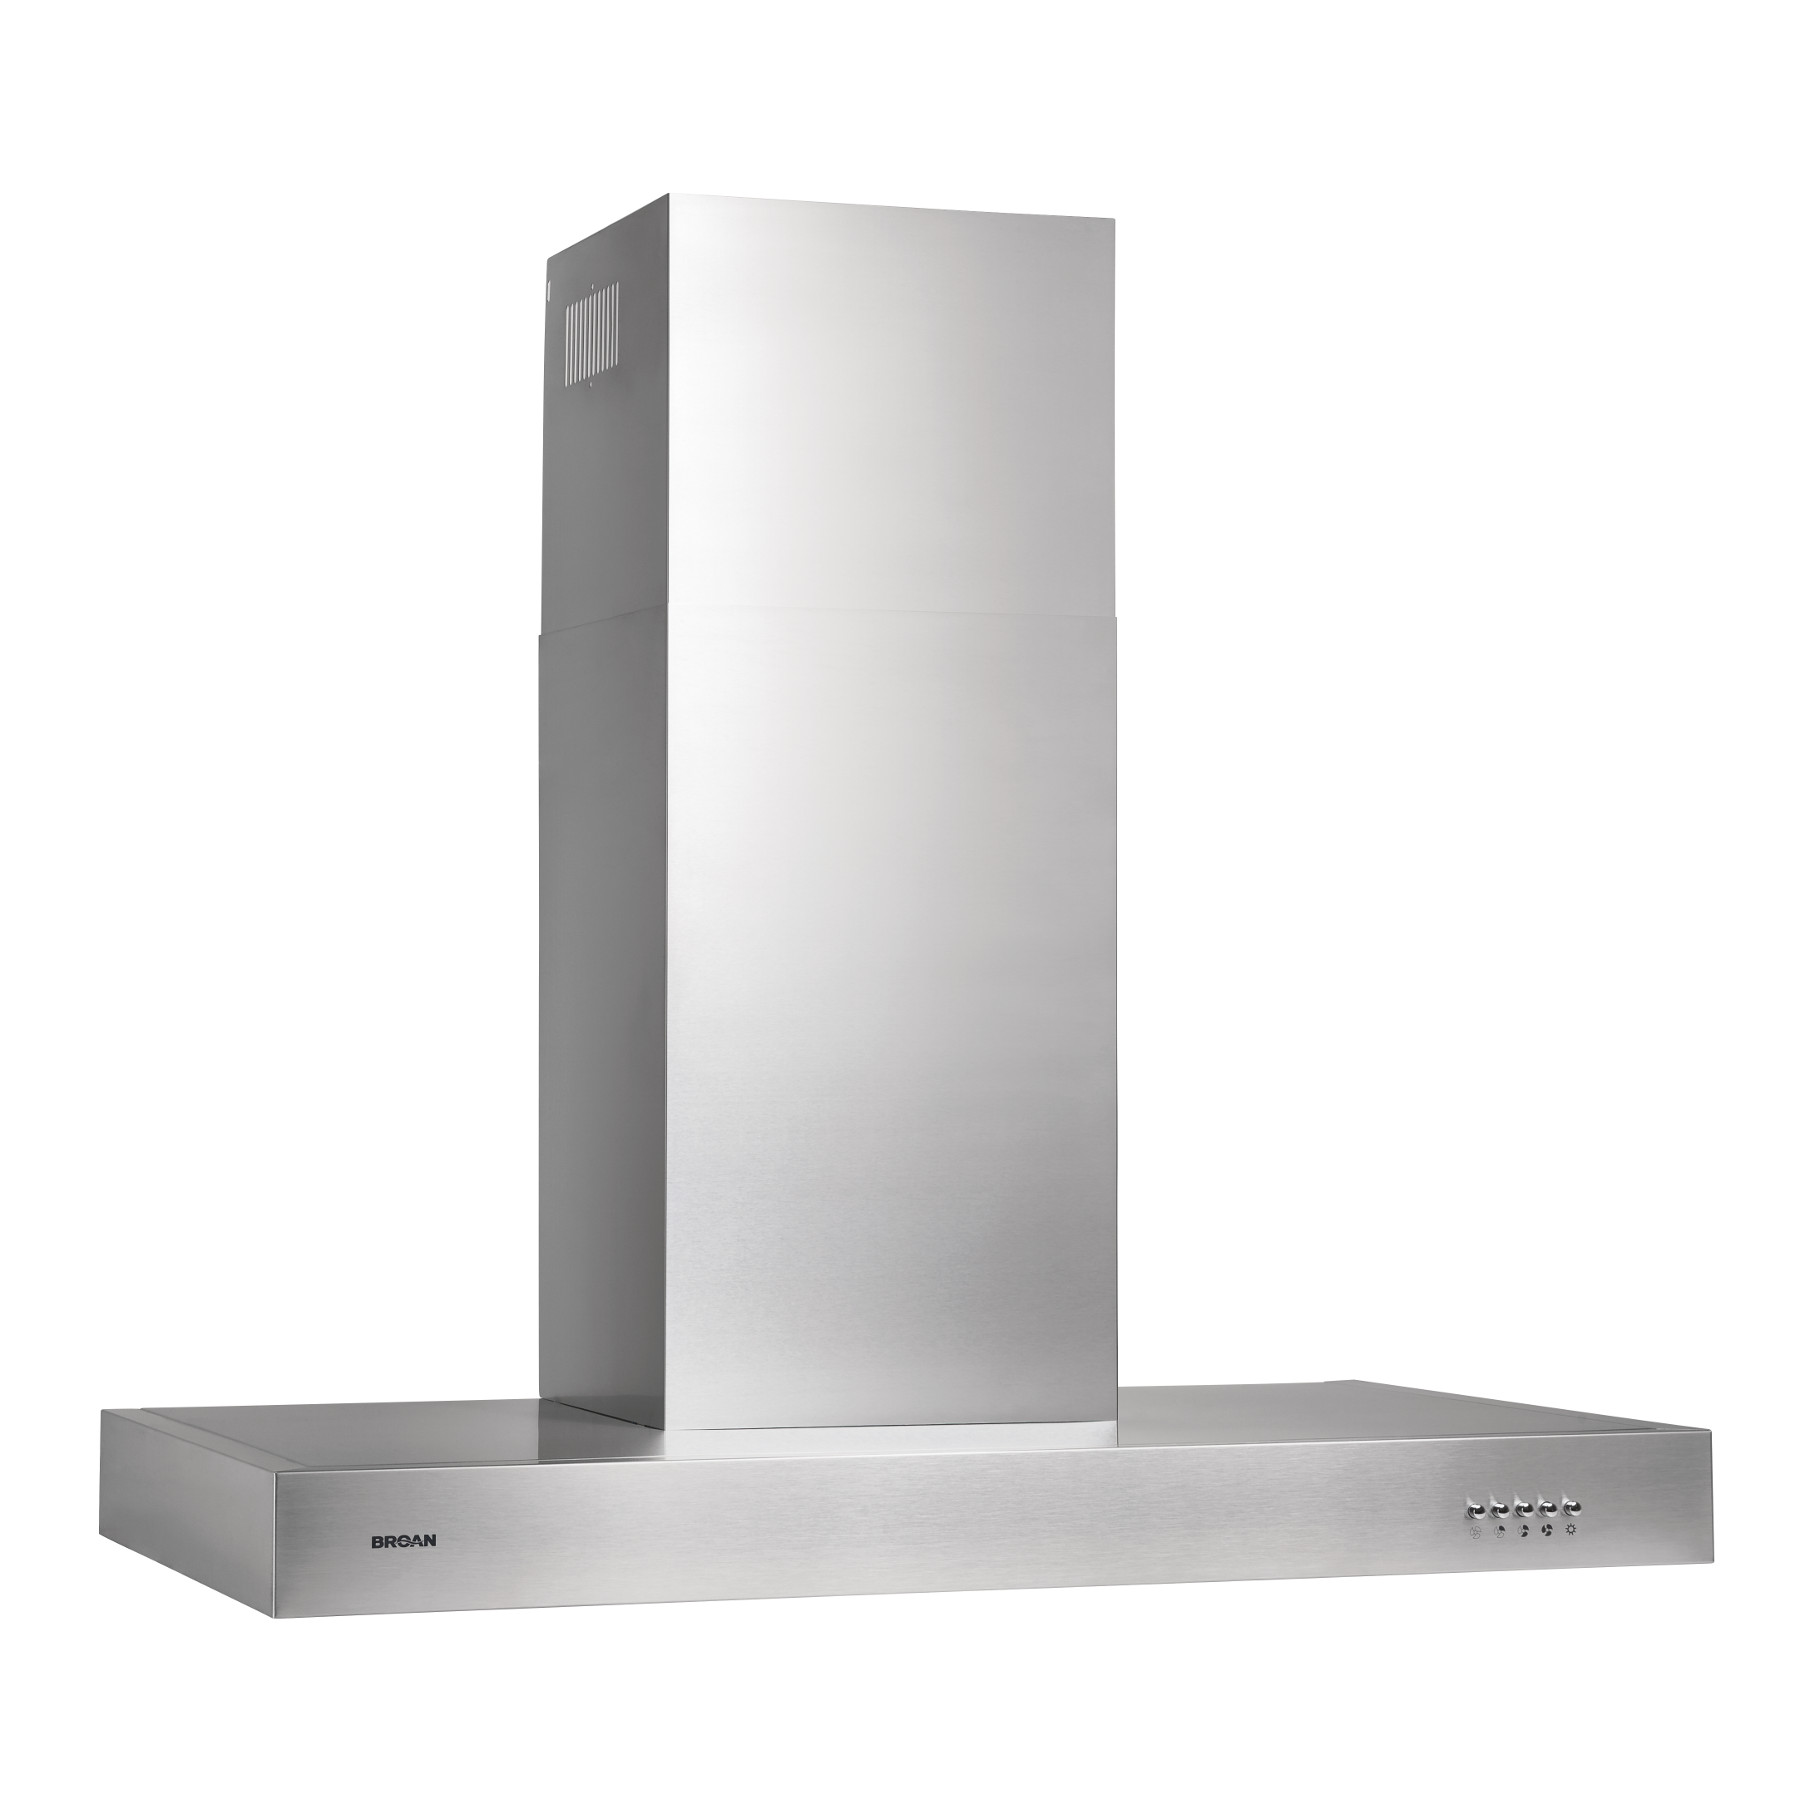 DISCONTINUED: Broan® 30-Inch Convertible Chimney Wall-Mount Range Hood, 450 CFM, Stainless Steel